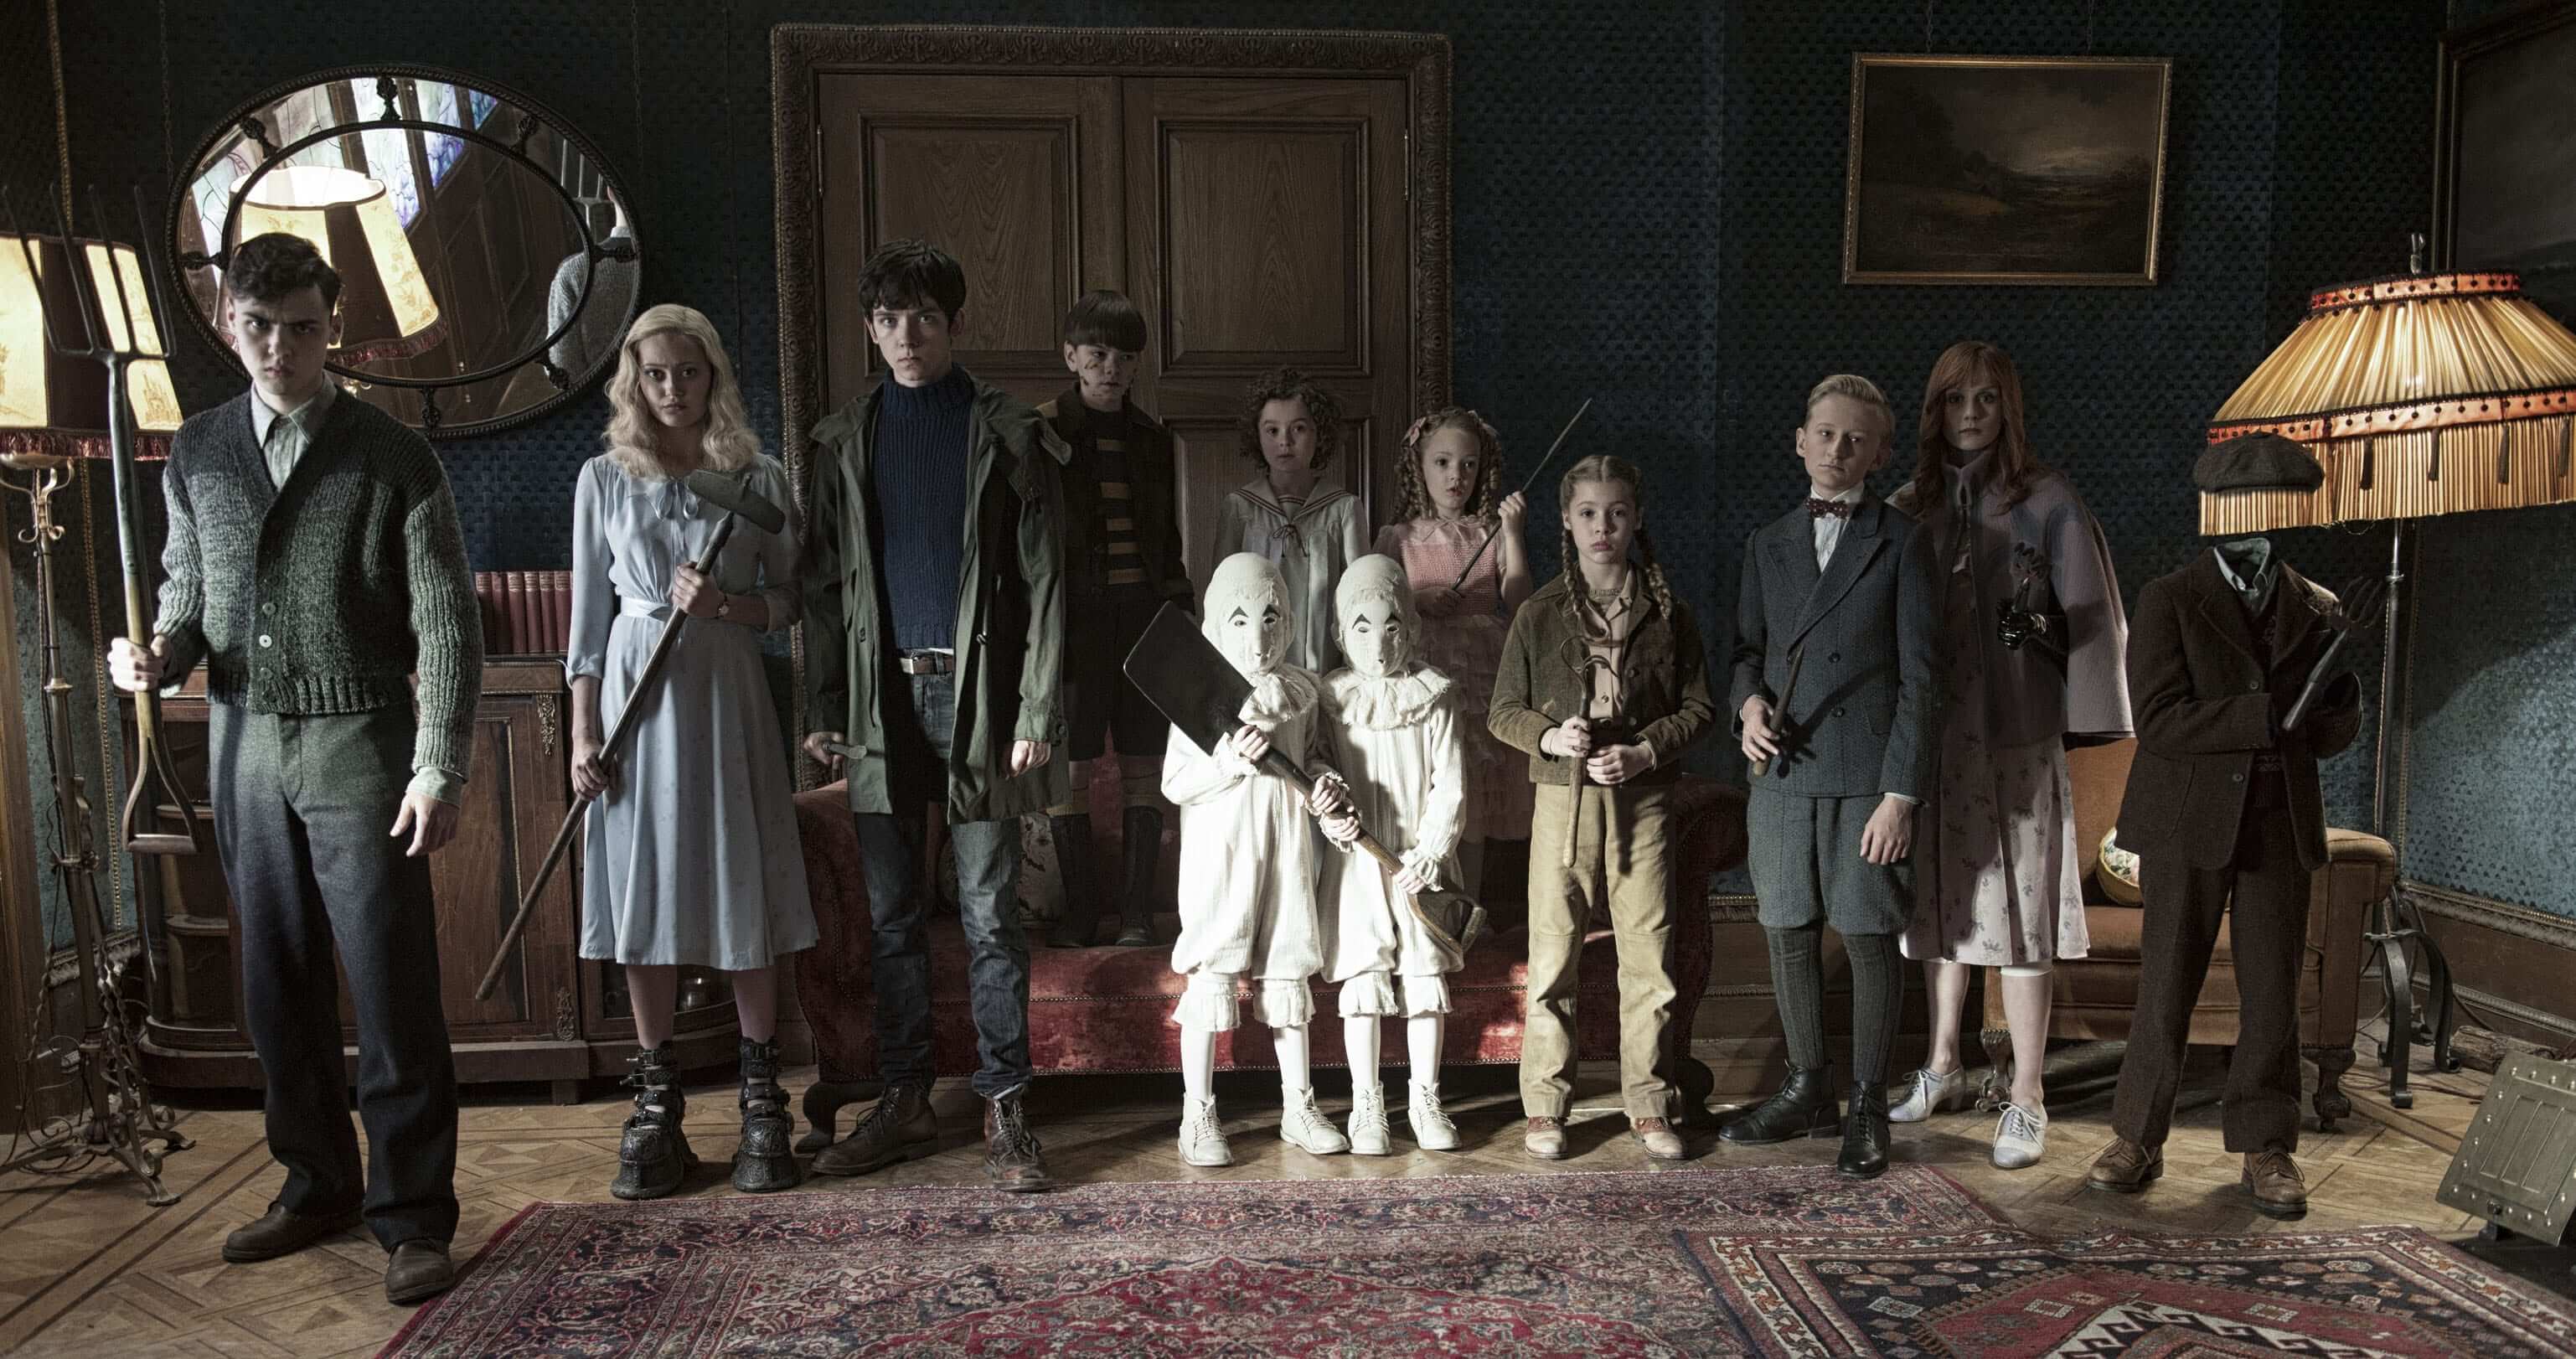 The peculiar children has to keep themselves safe from the Hollowgast